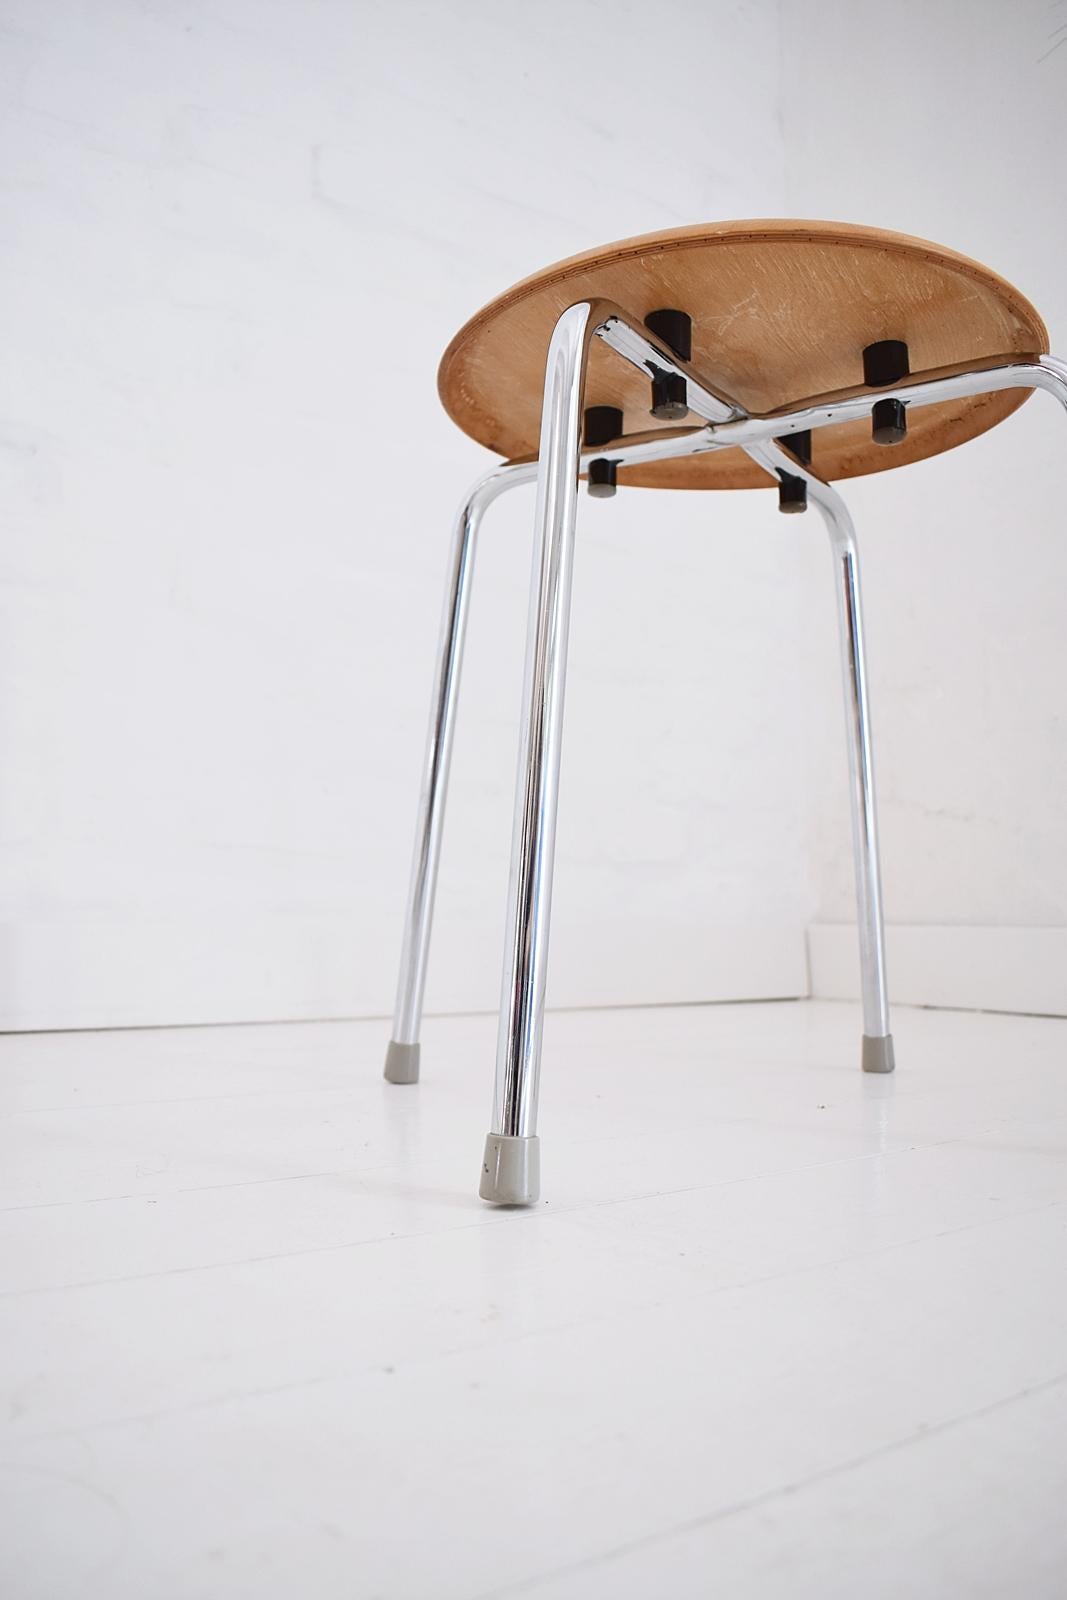 20th Century Vintage Egon Eiermann Stackable SE 38 Stool by Wilde+Spieth, Germany, 1950s For Sale